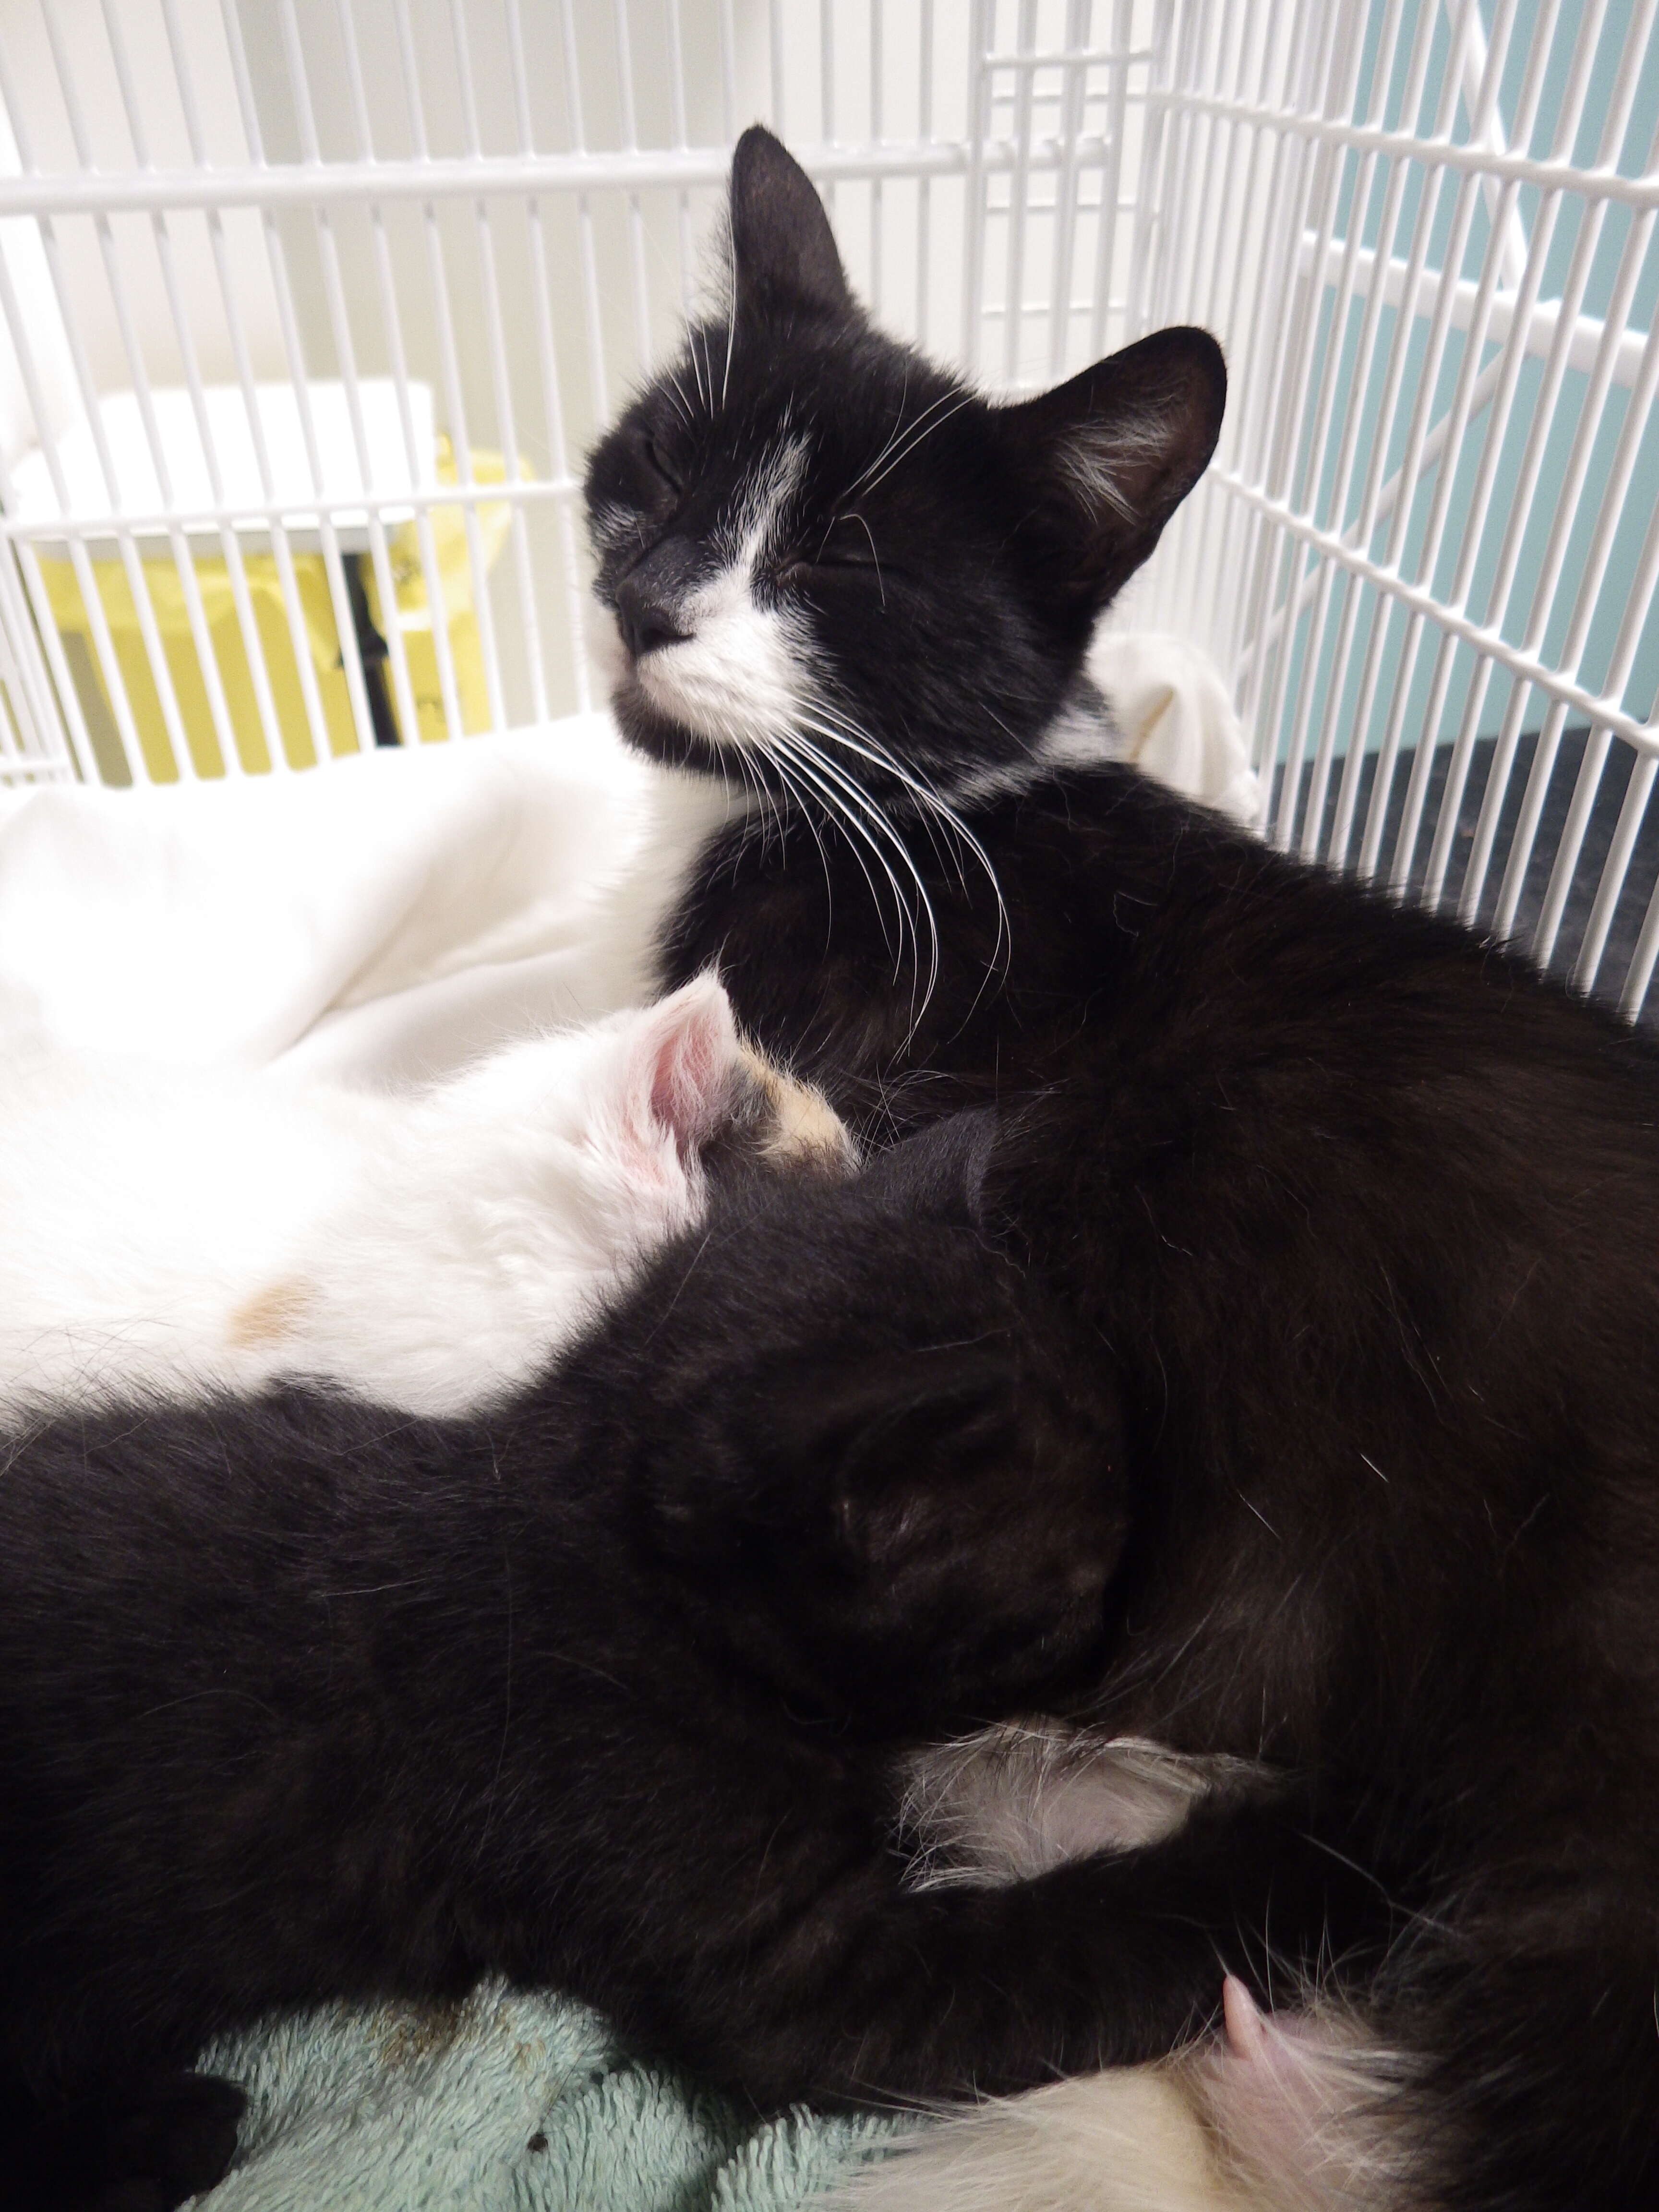 cat and kittens abandoned in garbage bag